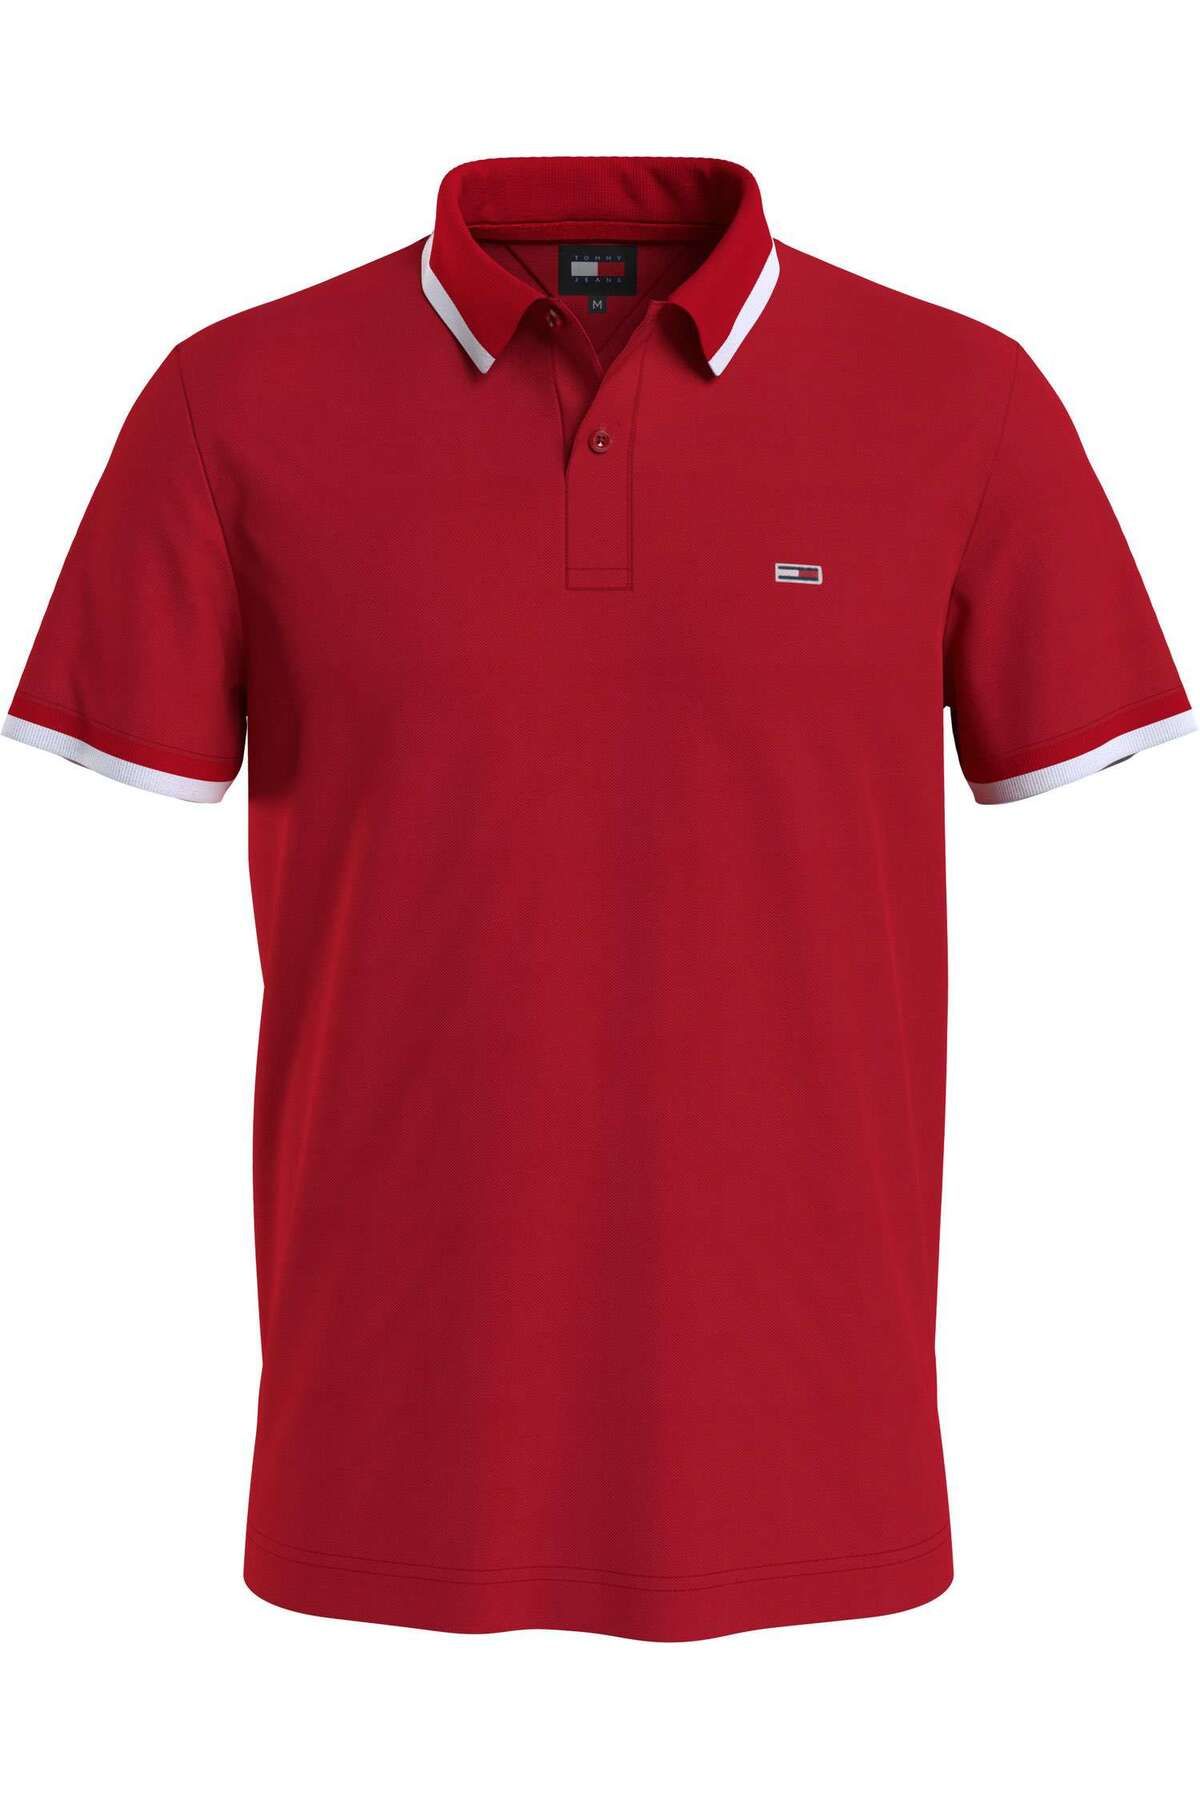 Tommy Hilfiger TOMMY JEANS ERKEK REGULAR FİT SOLID TIPPED POLO